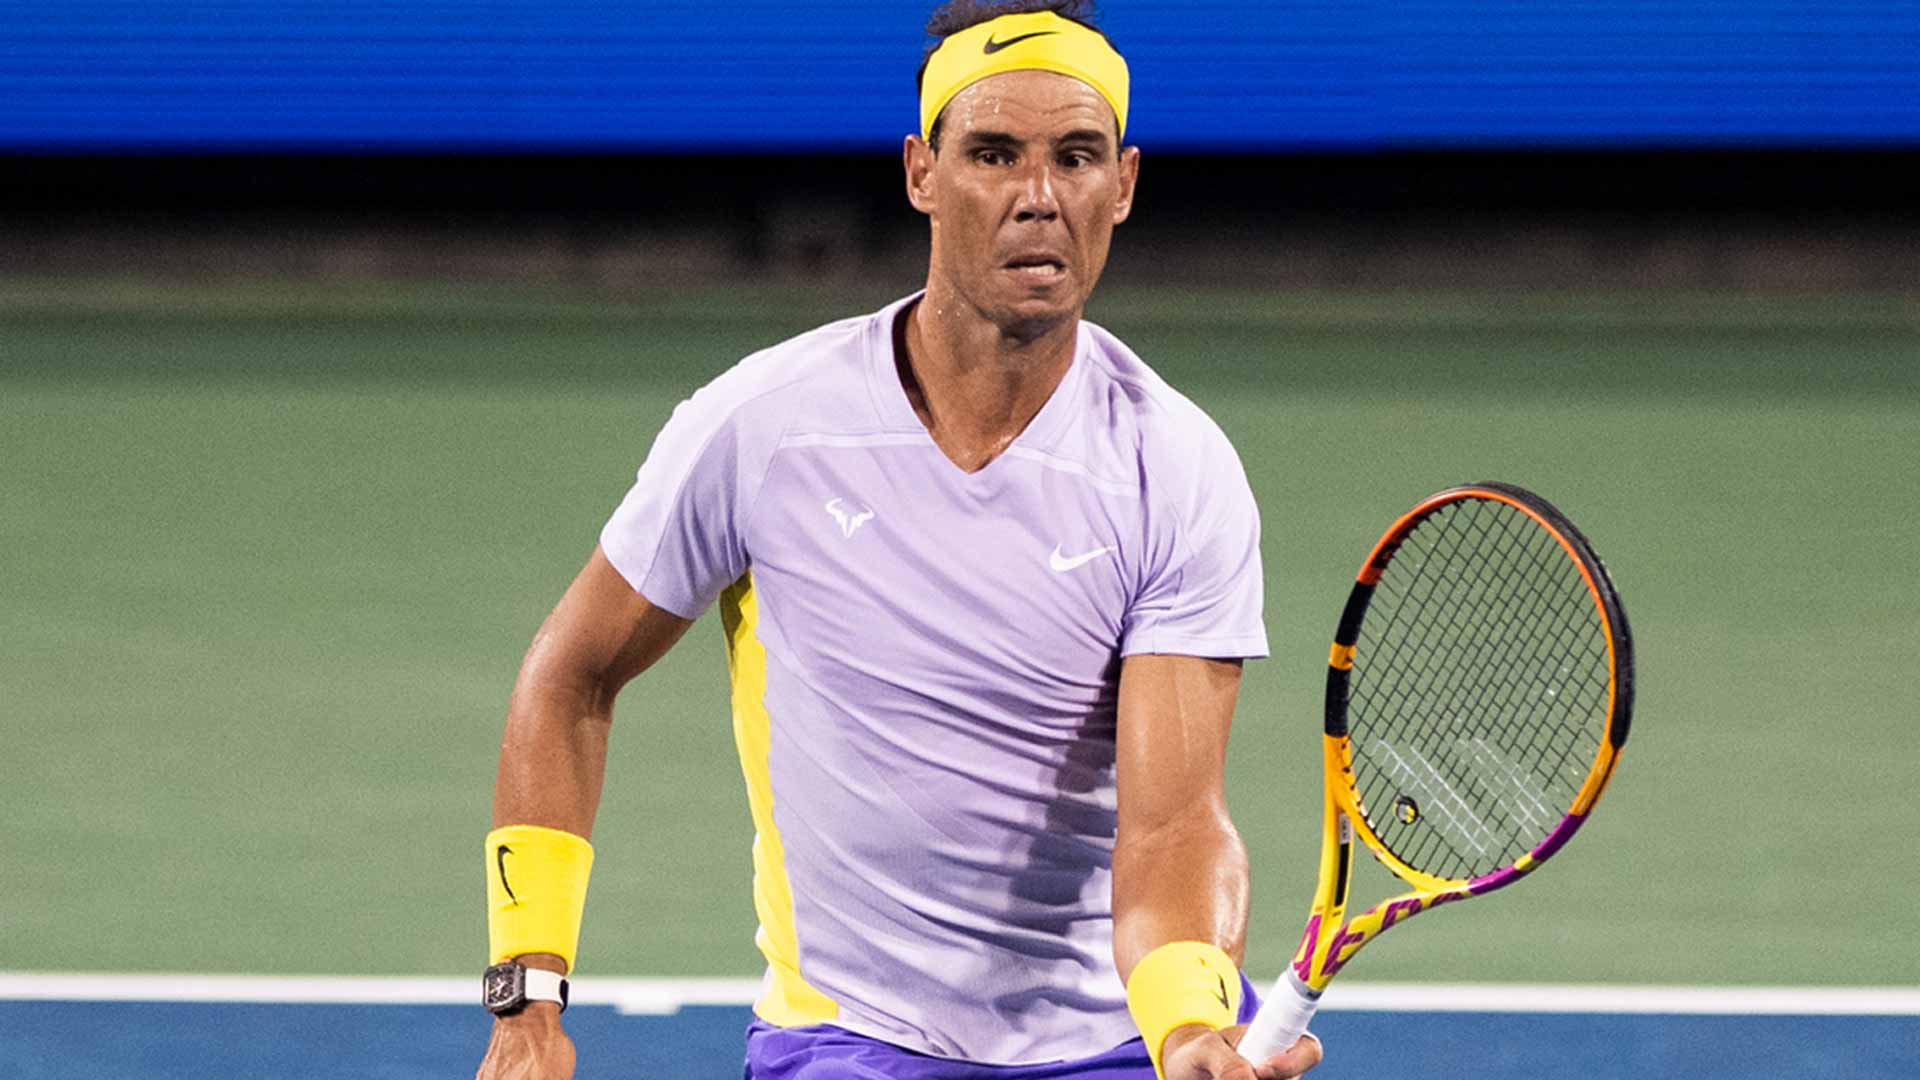 Rafael Nadal in action at the 2022 Western & Southern Open.